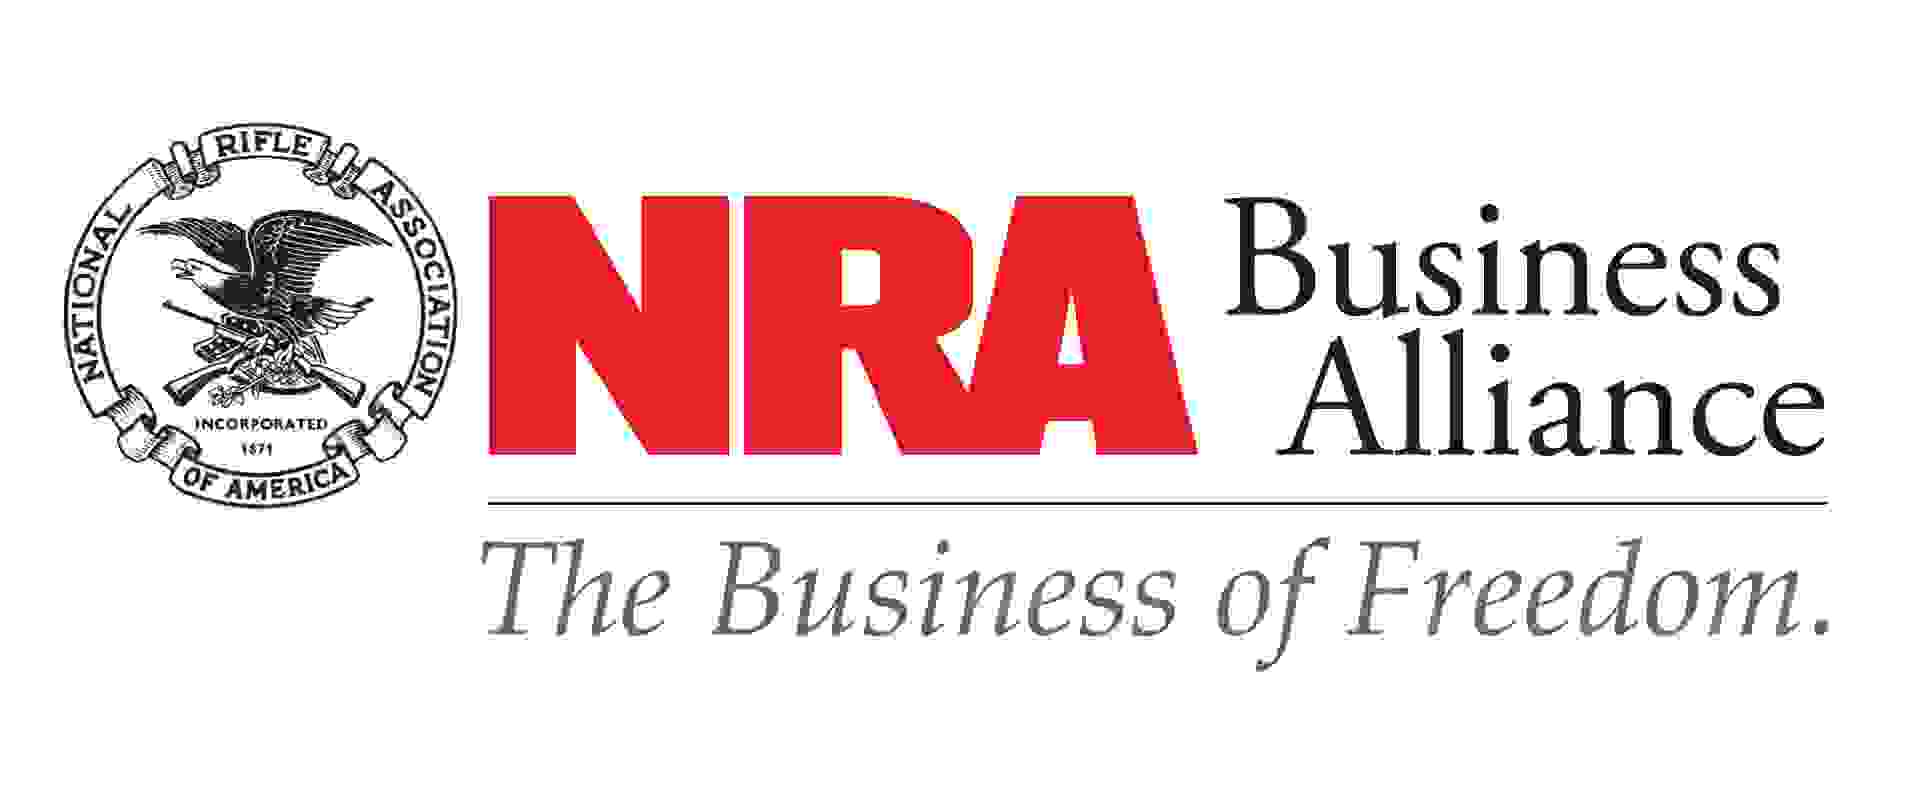 NRA Business Alliance Logo - The Business of Freedom